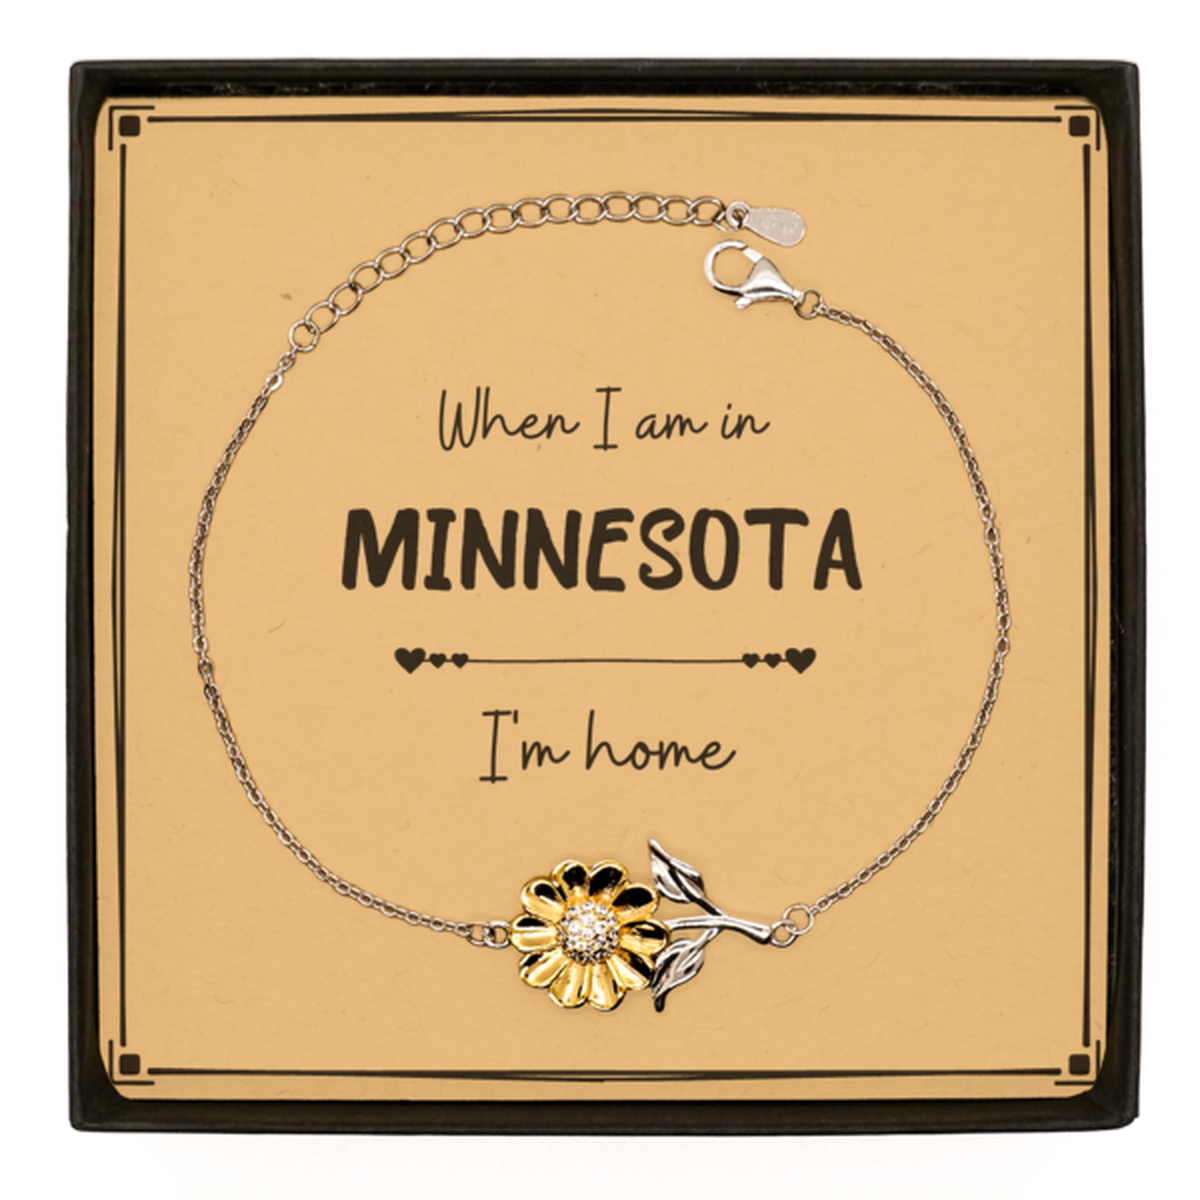 When I am in Minnesota I'm home Sunflower Bracelet, Message Card Gifts For Minnesota, State Minnesota Birthday Gifts for Friends Coworker